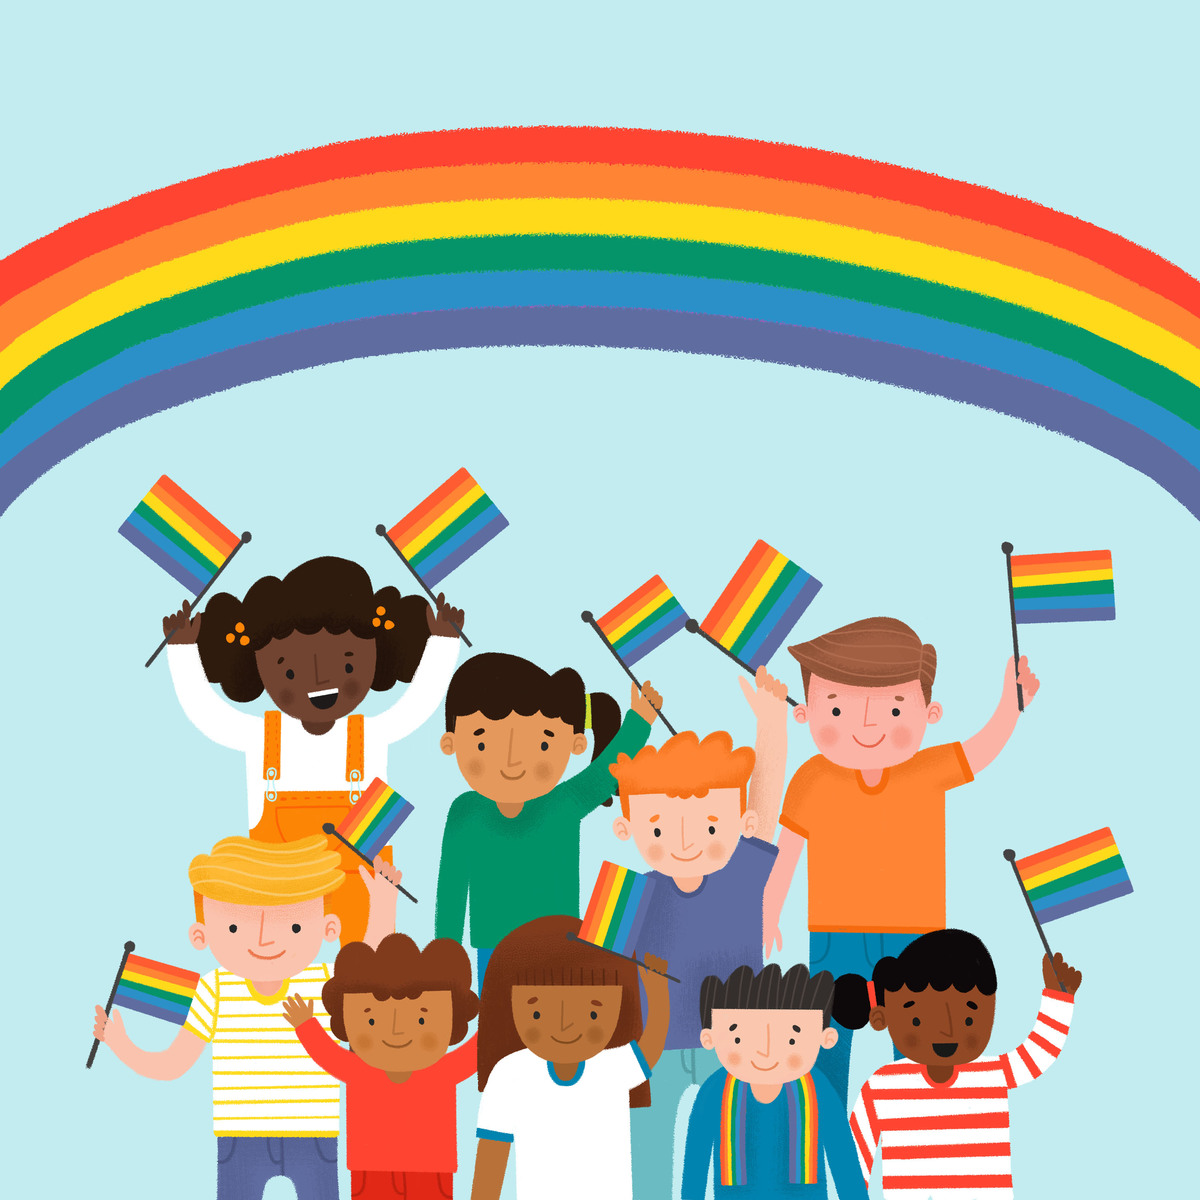 Welcome June, and welcome Pride Month! #KidLitArt 🏳️‍🌈
-
Illustration by #BrightArtist Andy Passchier | Represented by #BrightAgent Alex Gehringer